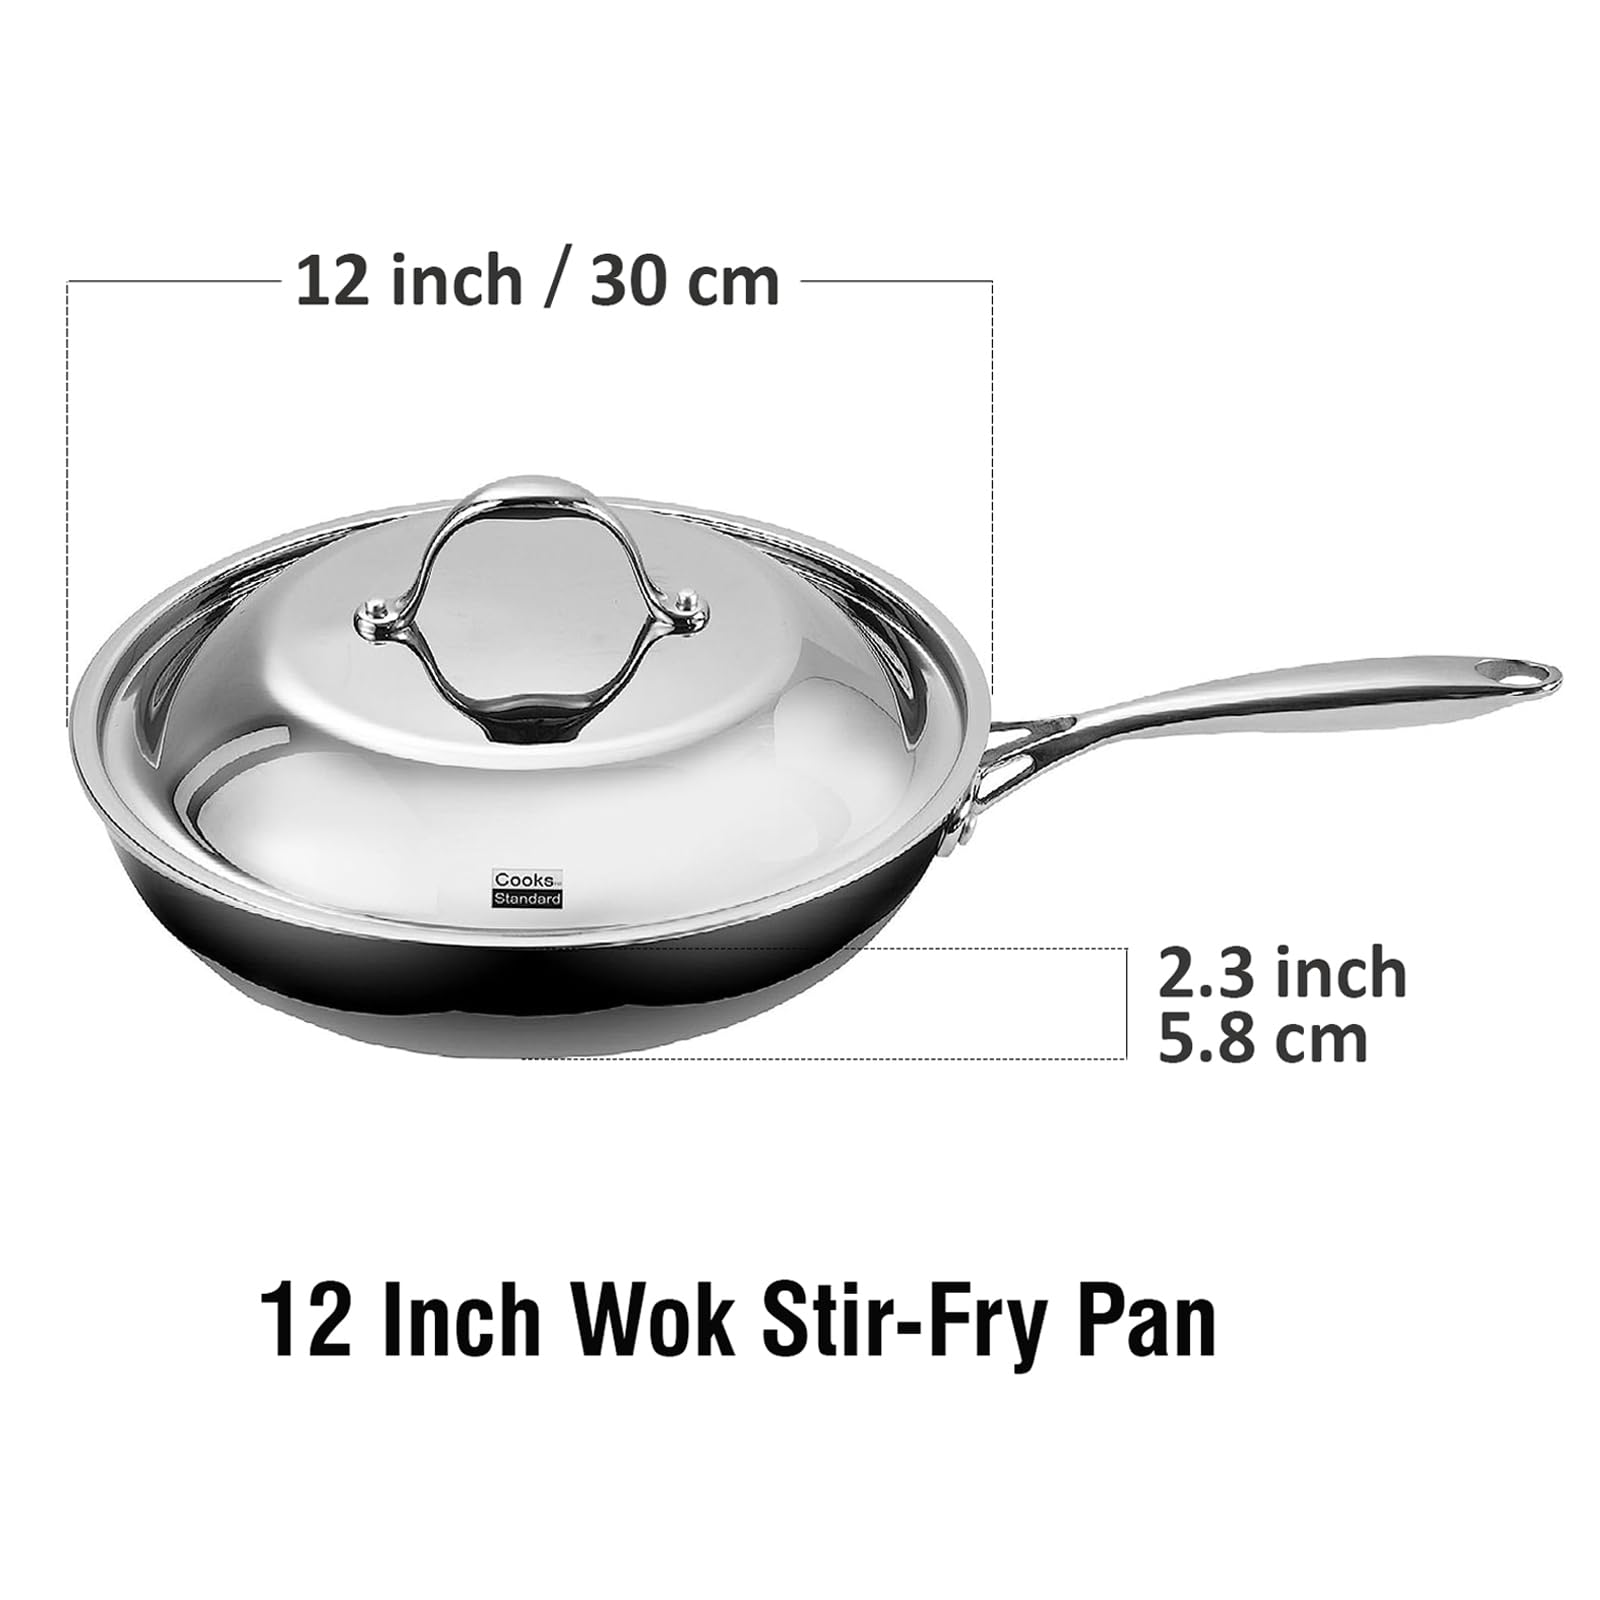 All-Clad Stainless 12 inch Fry Pan with Lid